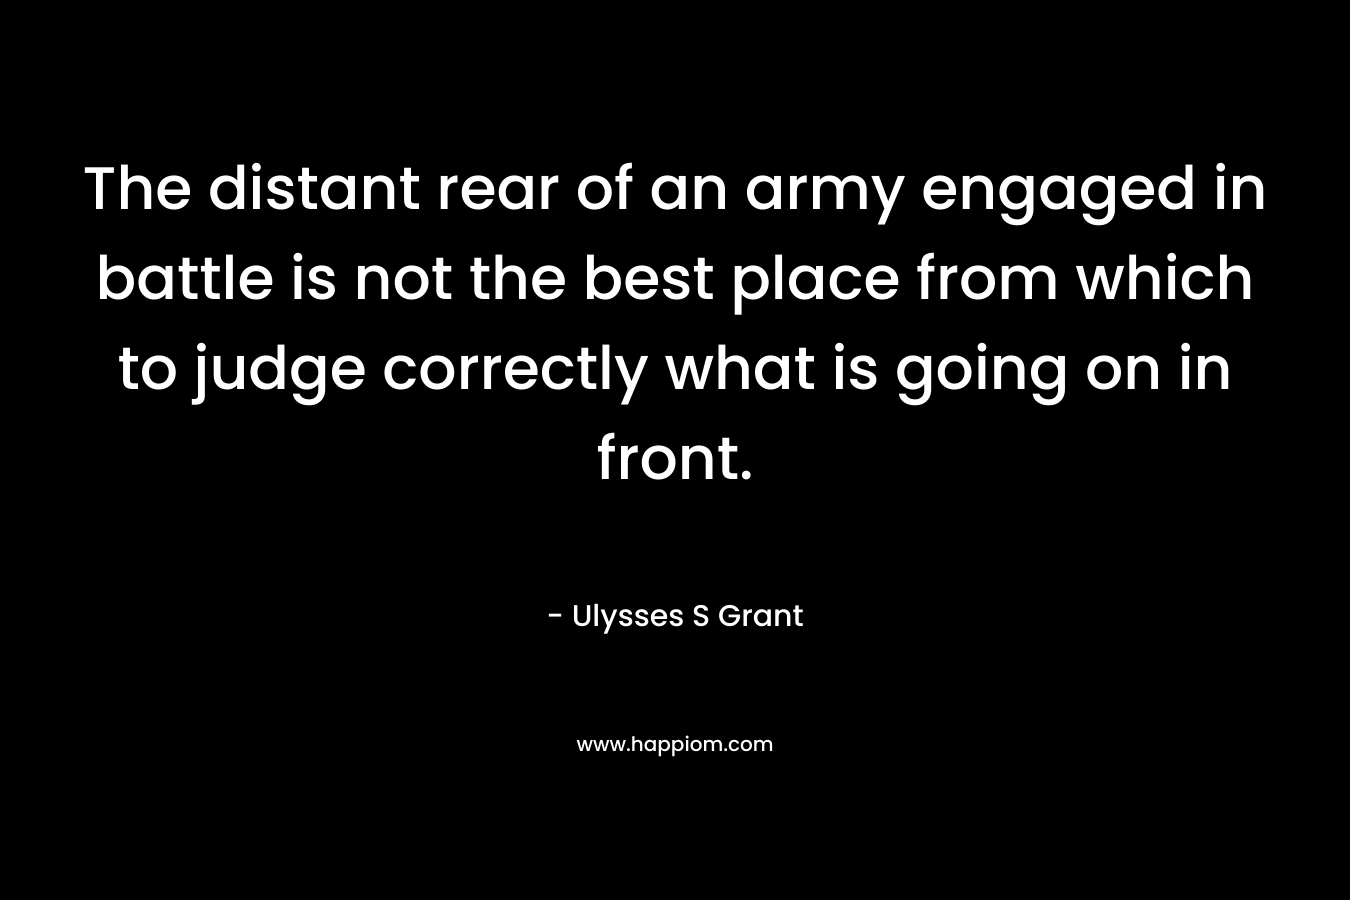 The distant rear of an army engaged in battle is not the best place from which to judge correctly what is going on in front.